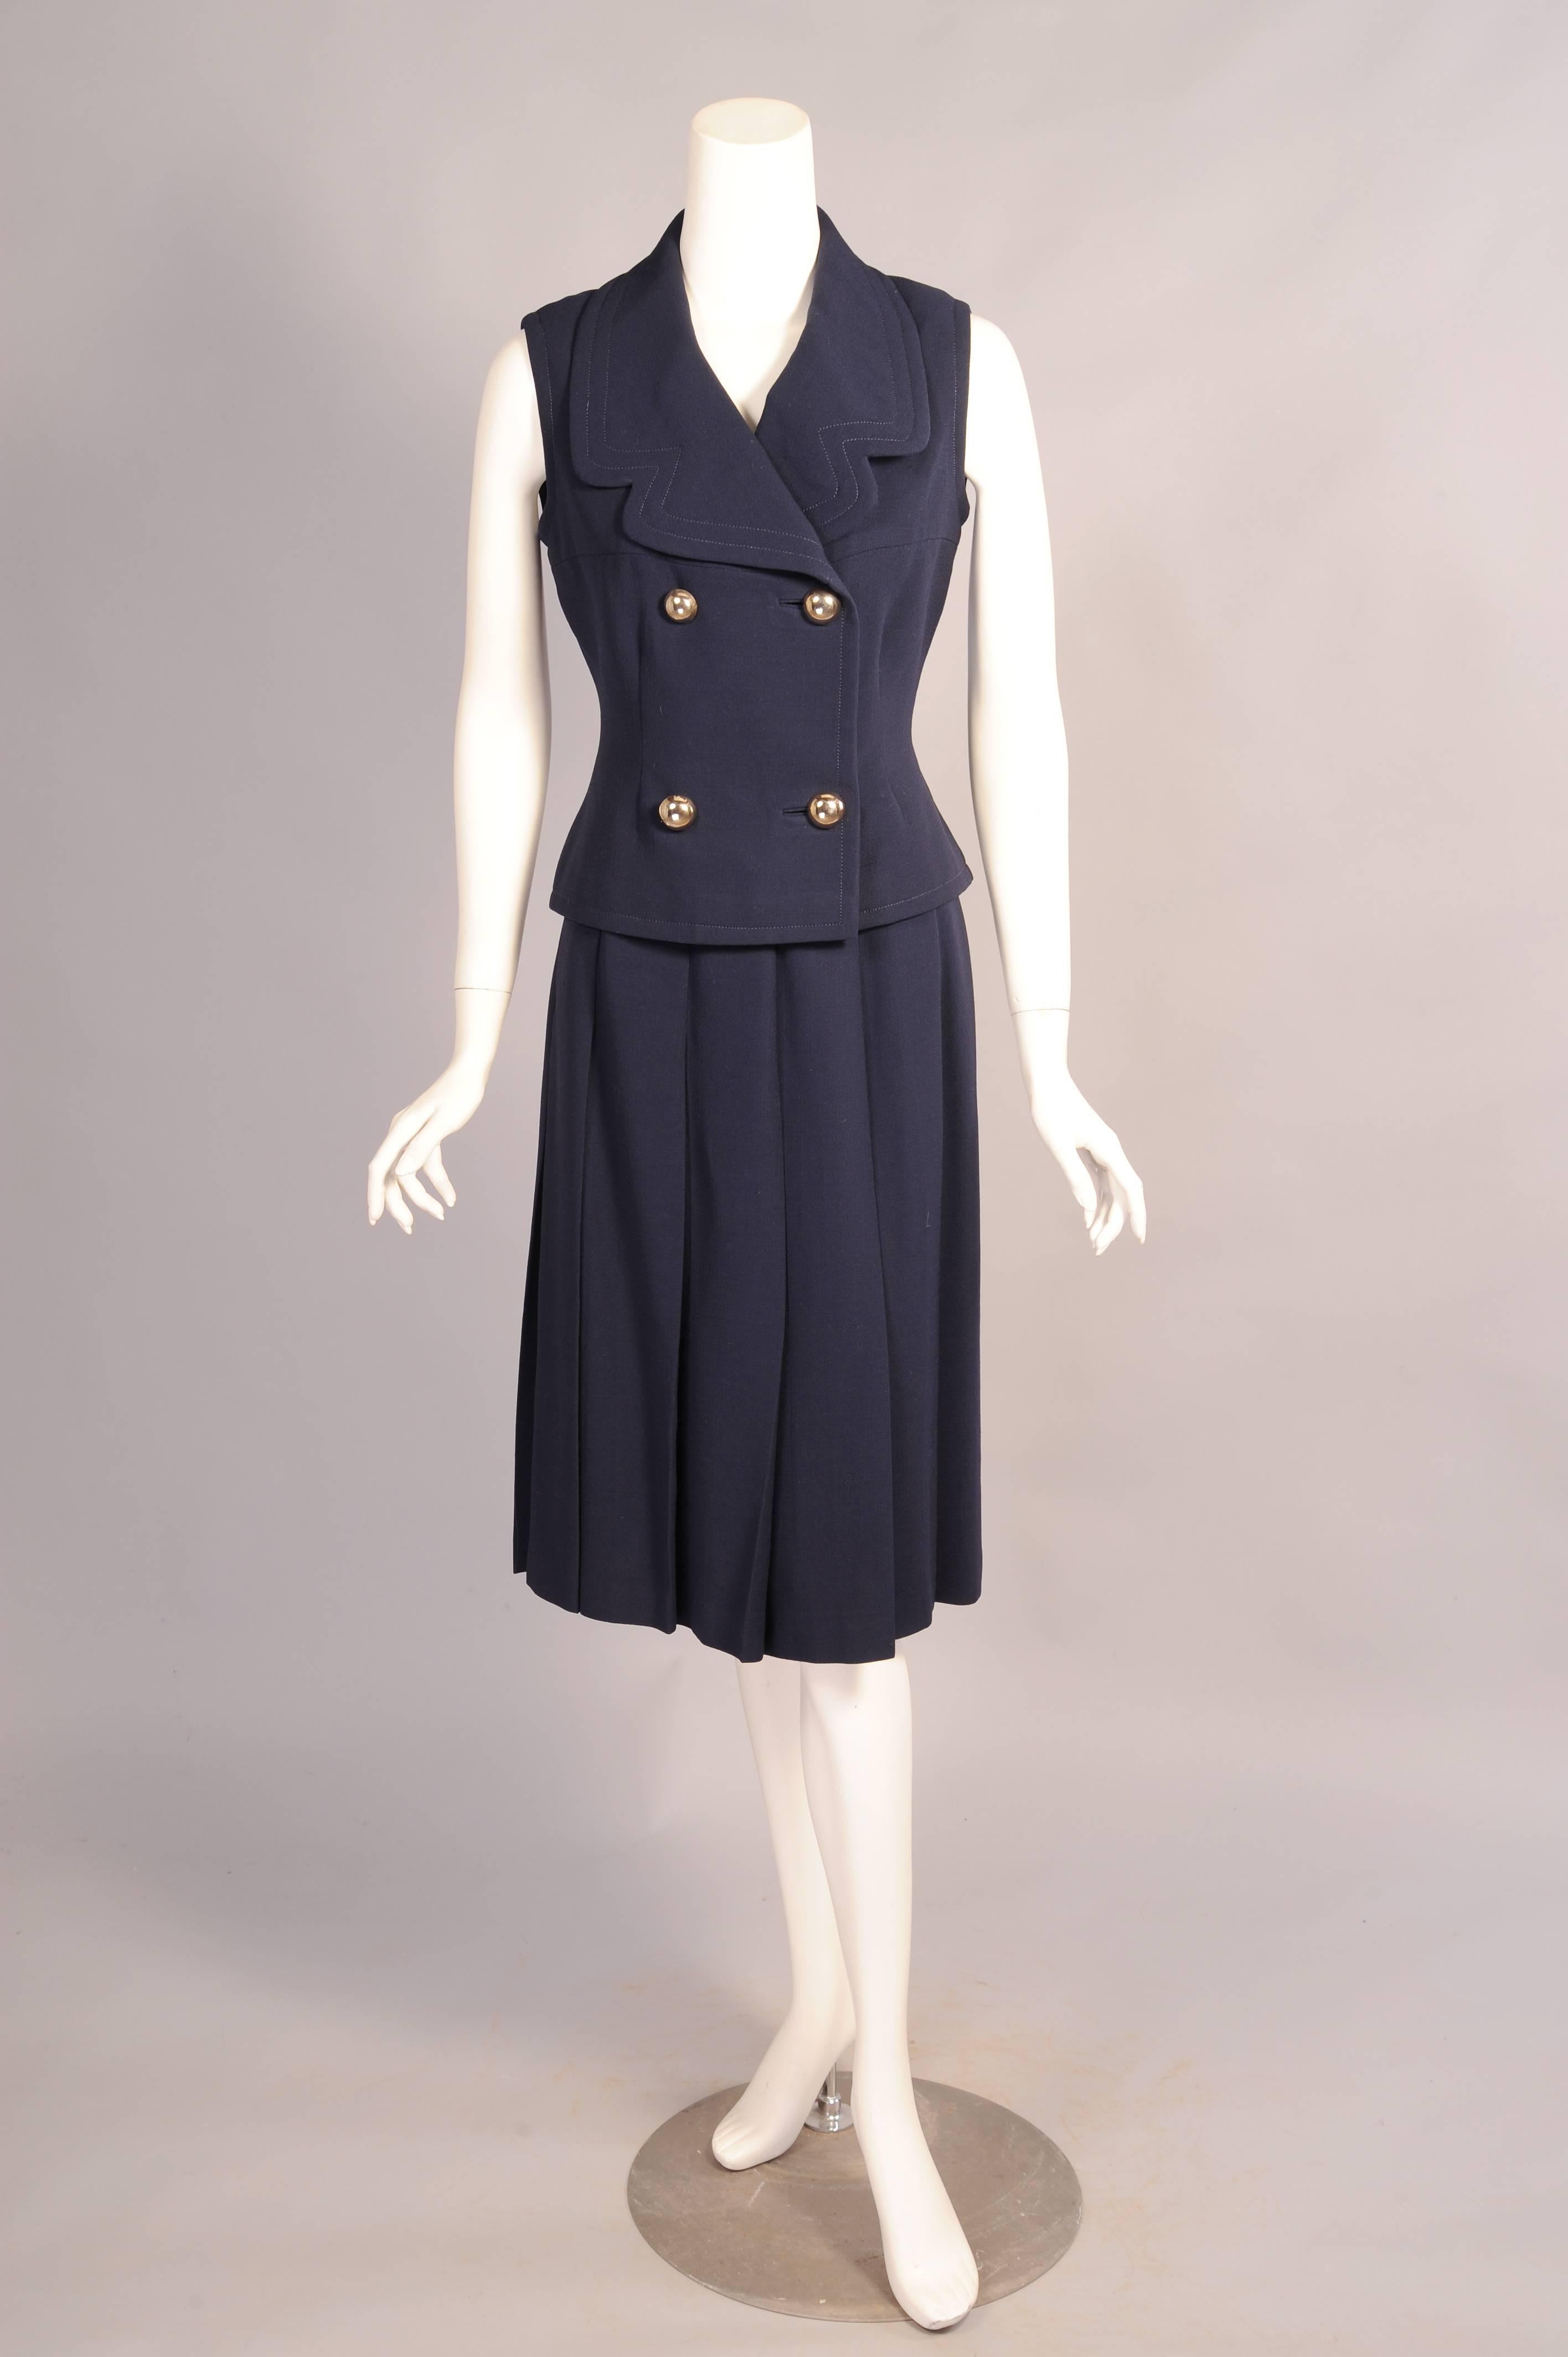 A modern take on a classic suit jacket, Cardin designed this one without sleeves. He added oversized notched lapels and four silver toned dome shaped buttons at the center front. The matching skirt has a wide flat waistband over the hips and